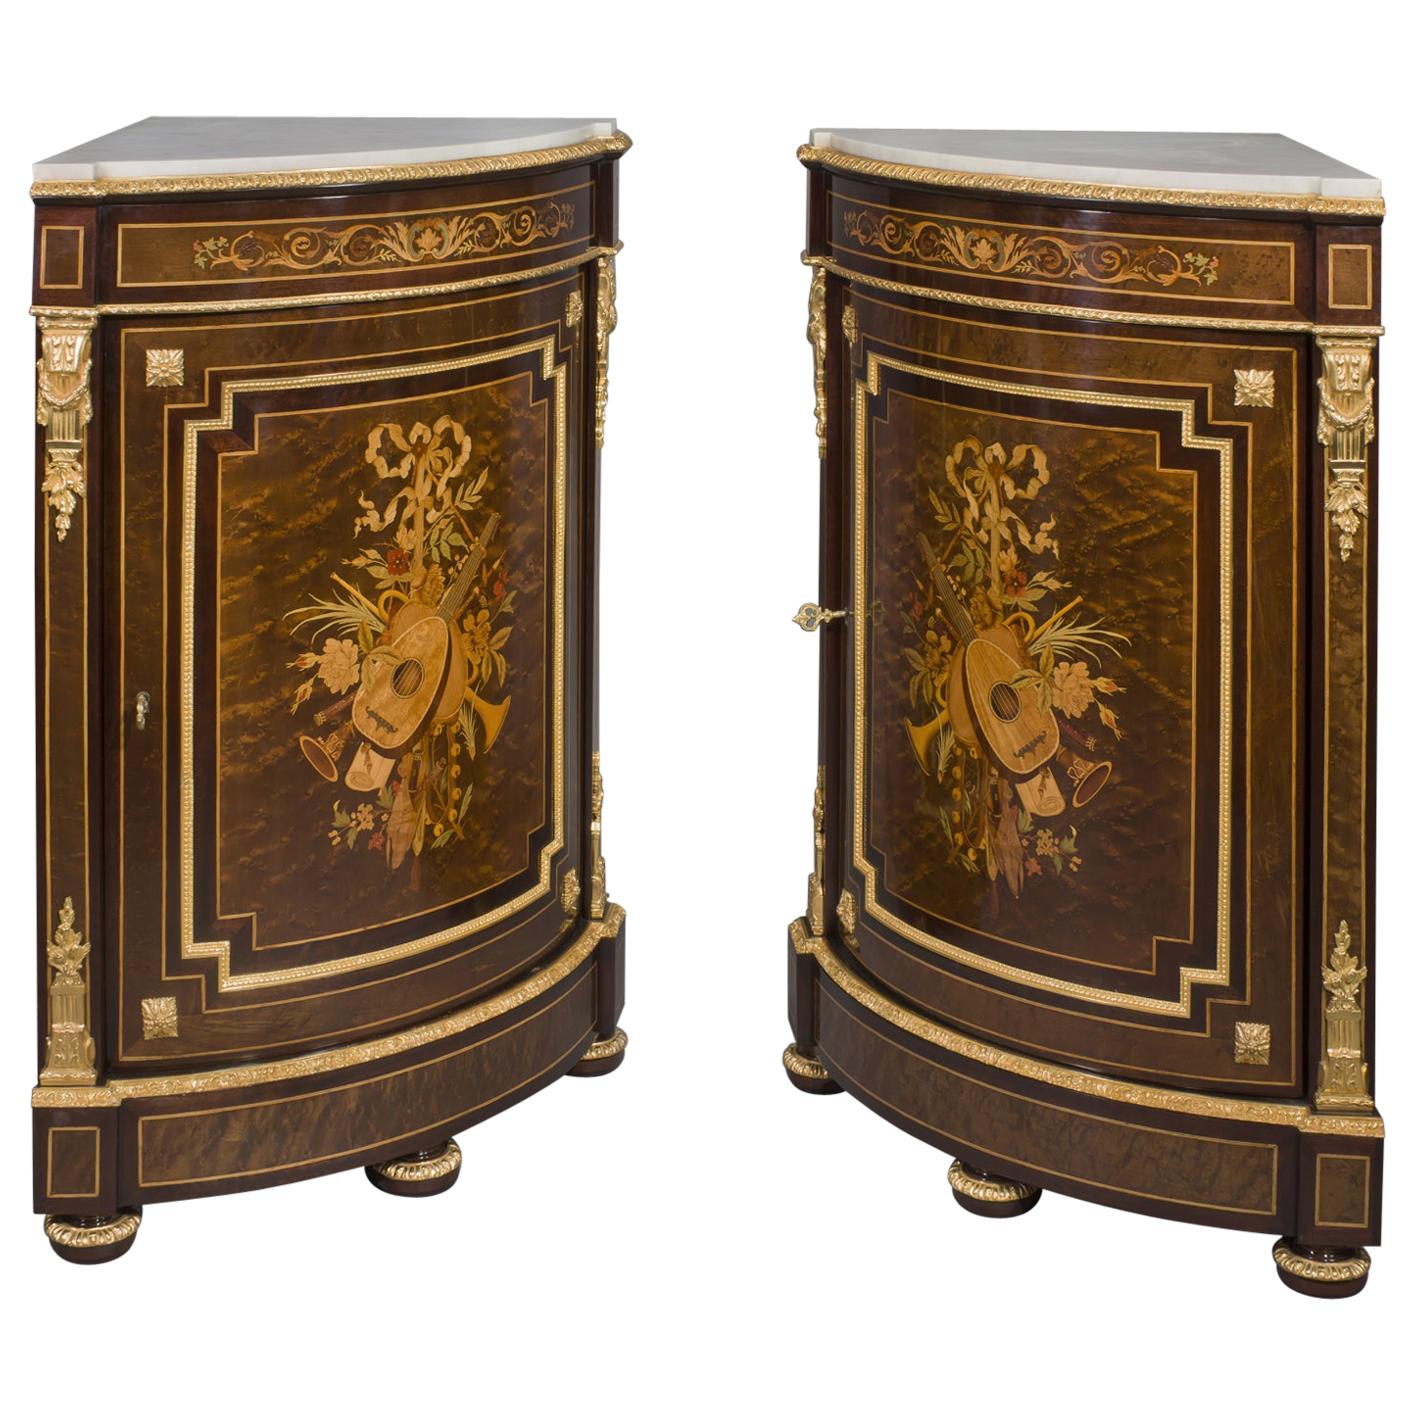 Louis XVI Style Marquetry Inlaid Encoignures by Paul Sormani, French, circa 1870 For Sale